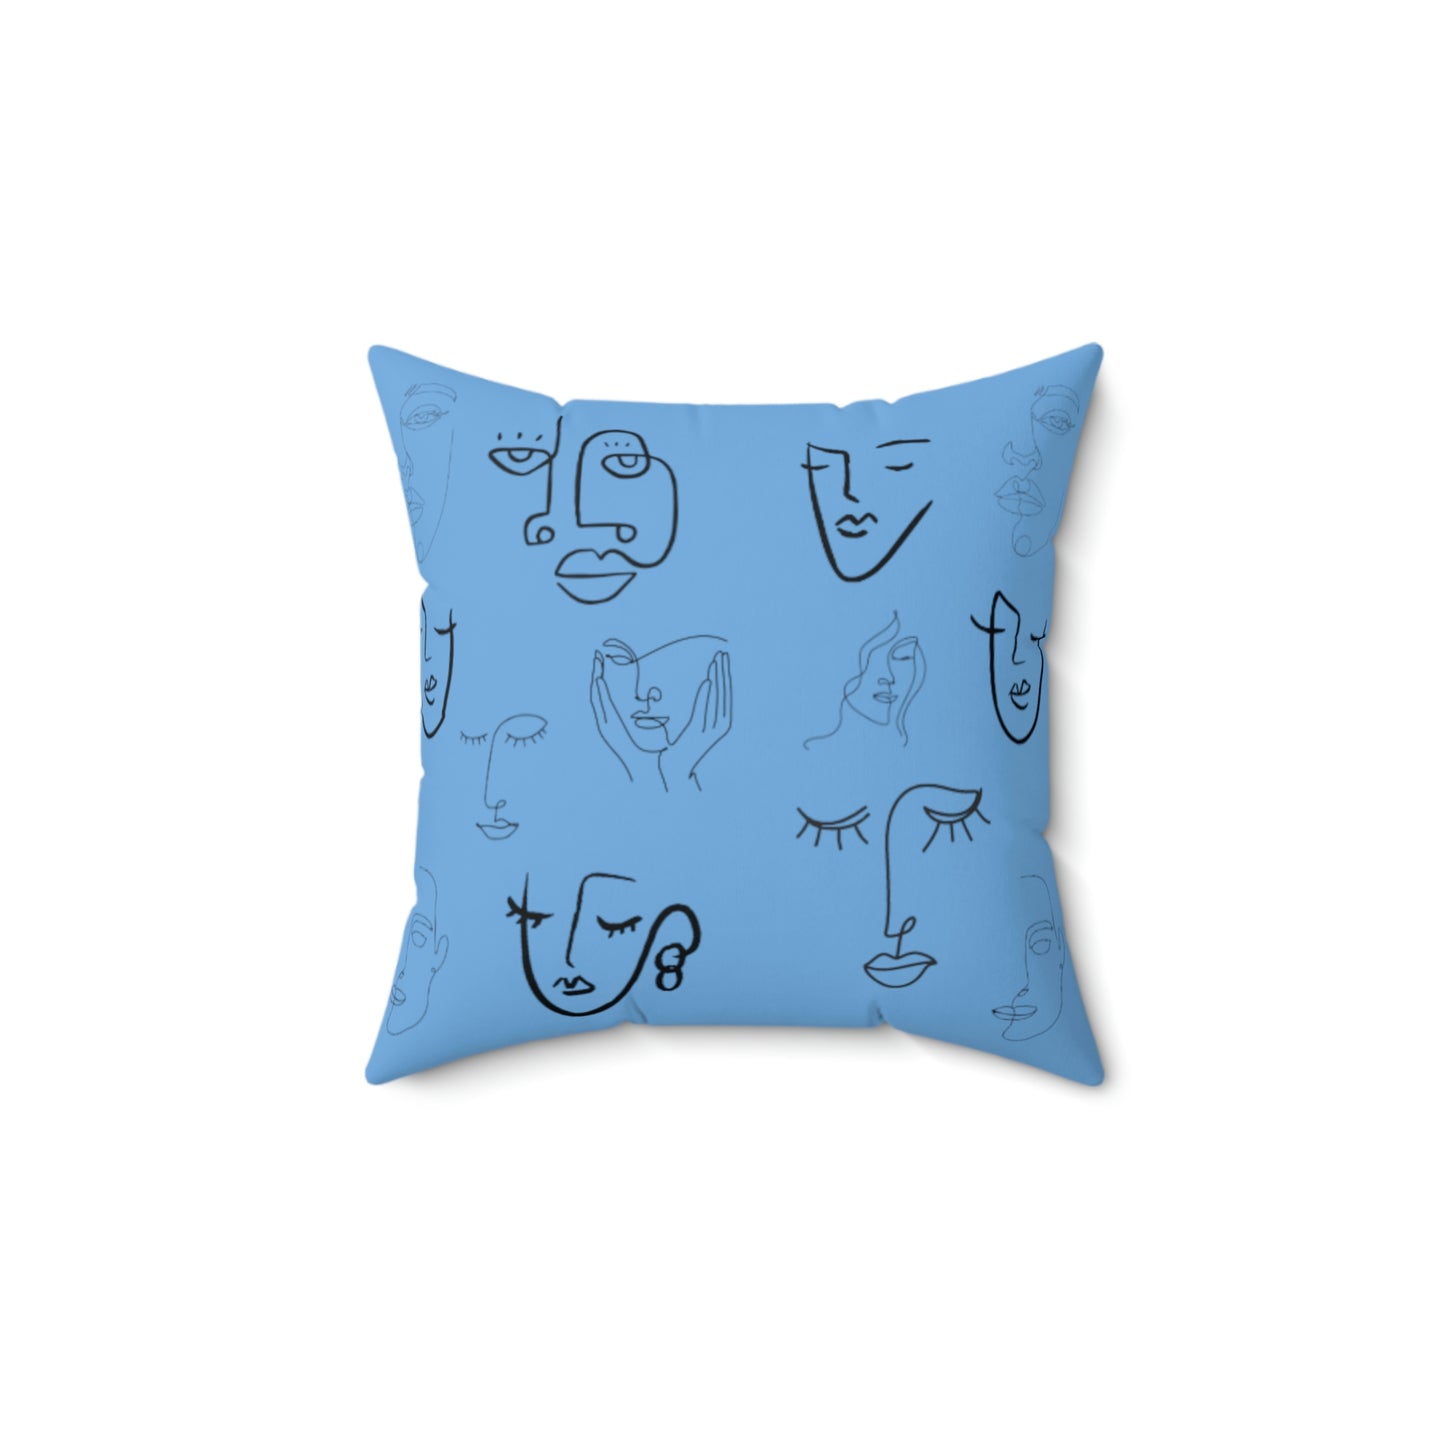 Many Faces blue - Spun Polyester Square Pillow